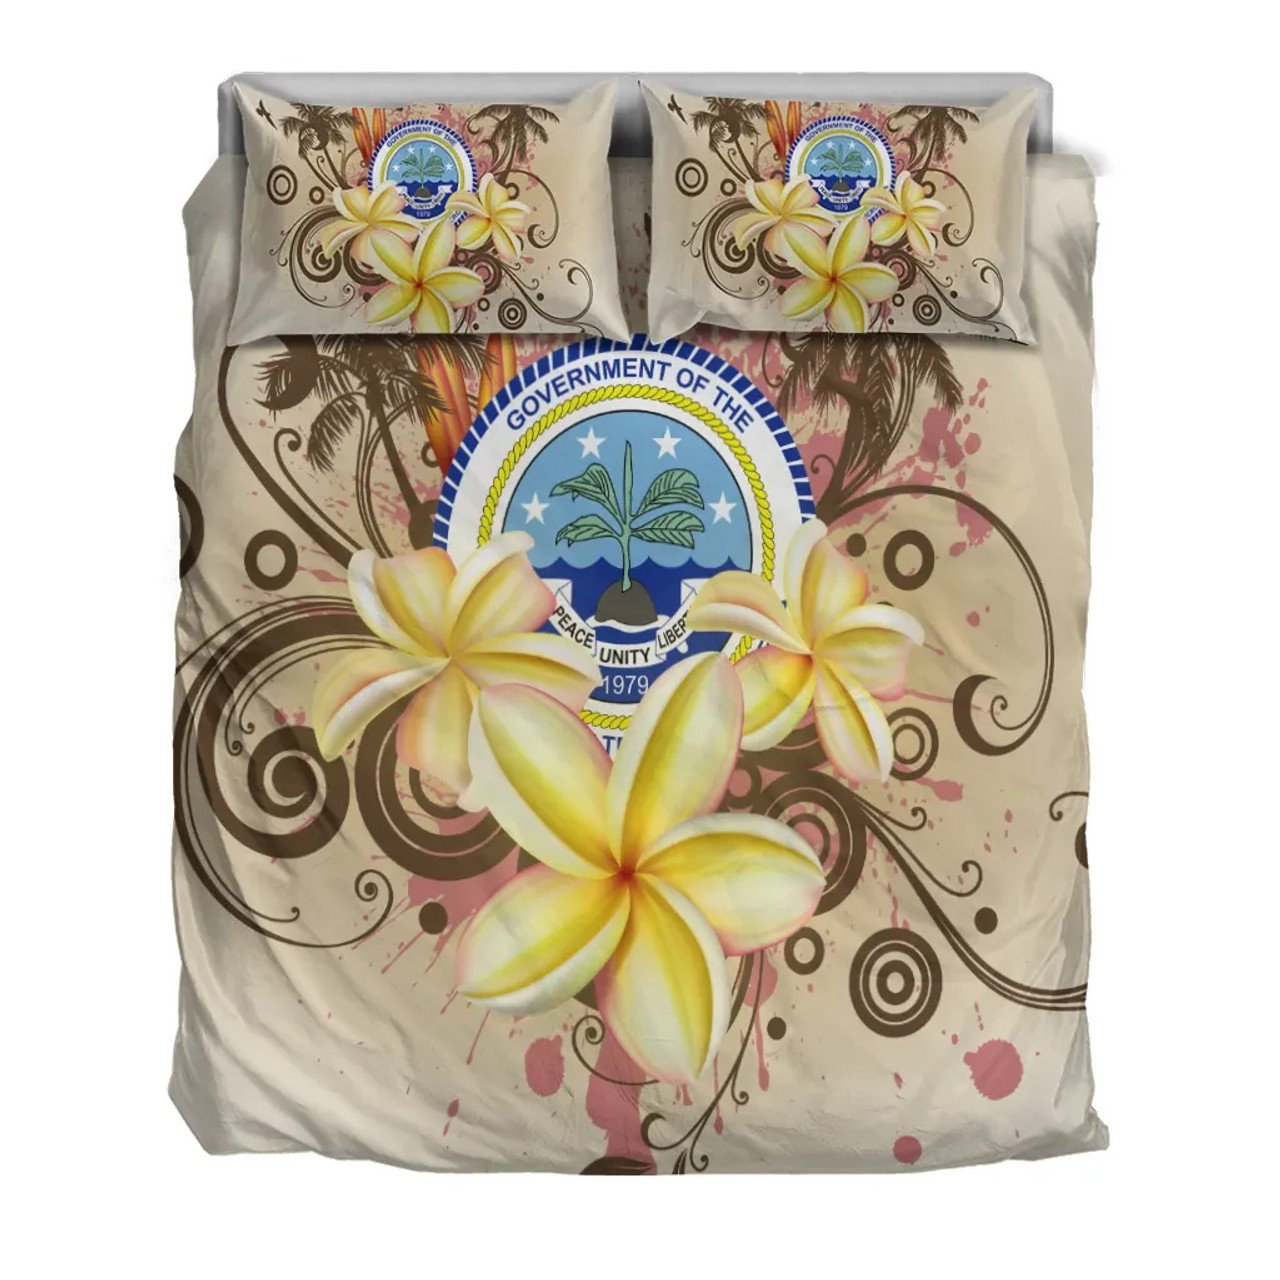 Federated States Of Micronesia Polynesian Bedding Set - Turtle With Blooming Hibiscus Gold 5